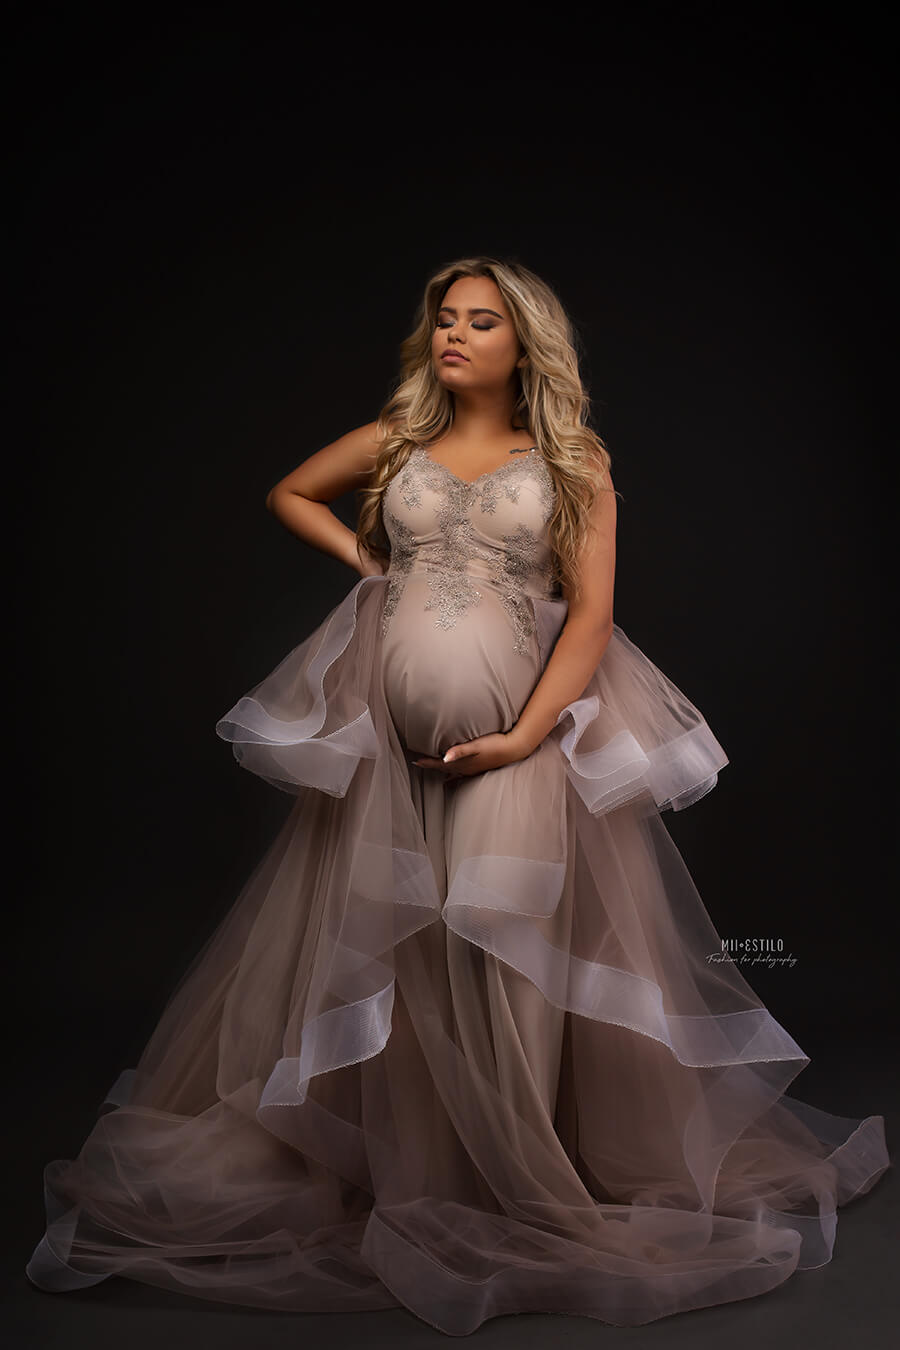 Pregnant blond woman poses in a studio wearing a dress made of tulle and bridal 3d lace. She has her eyes closed and looks up while holding her bump with one of her hands. The dress has a sand color and the skirt is made in layers of tulle. 